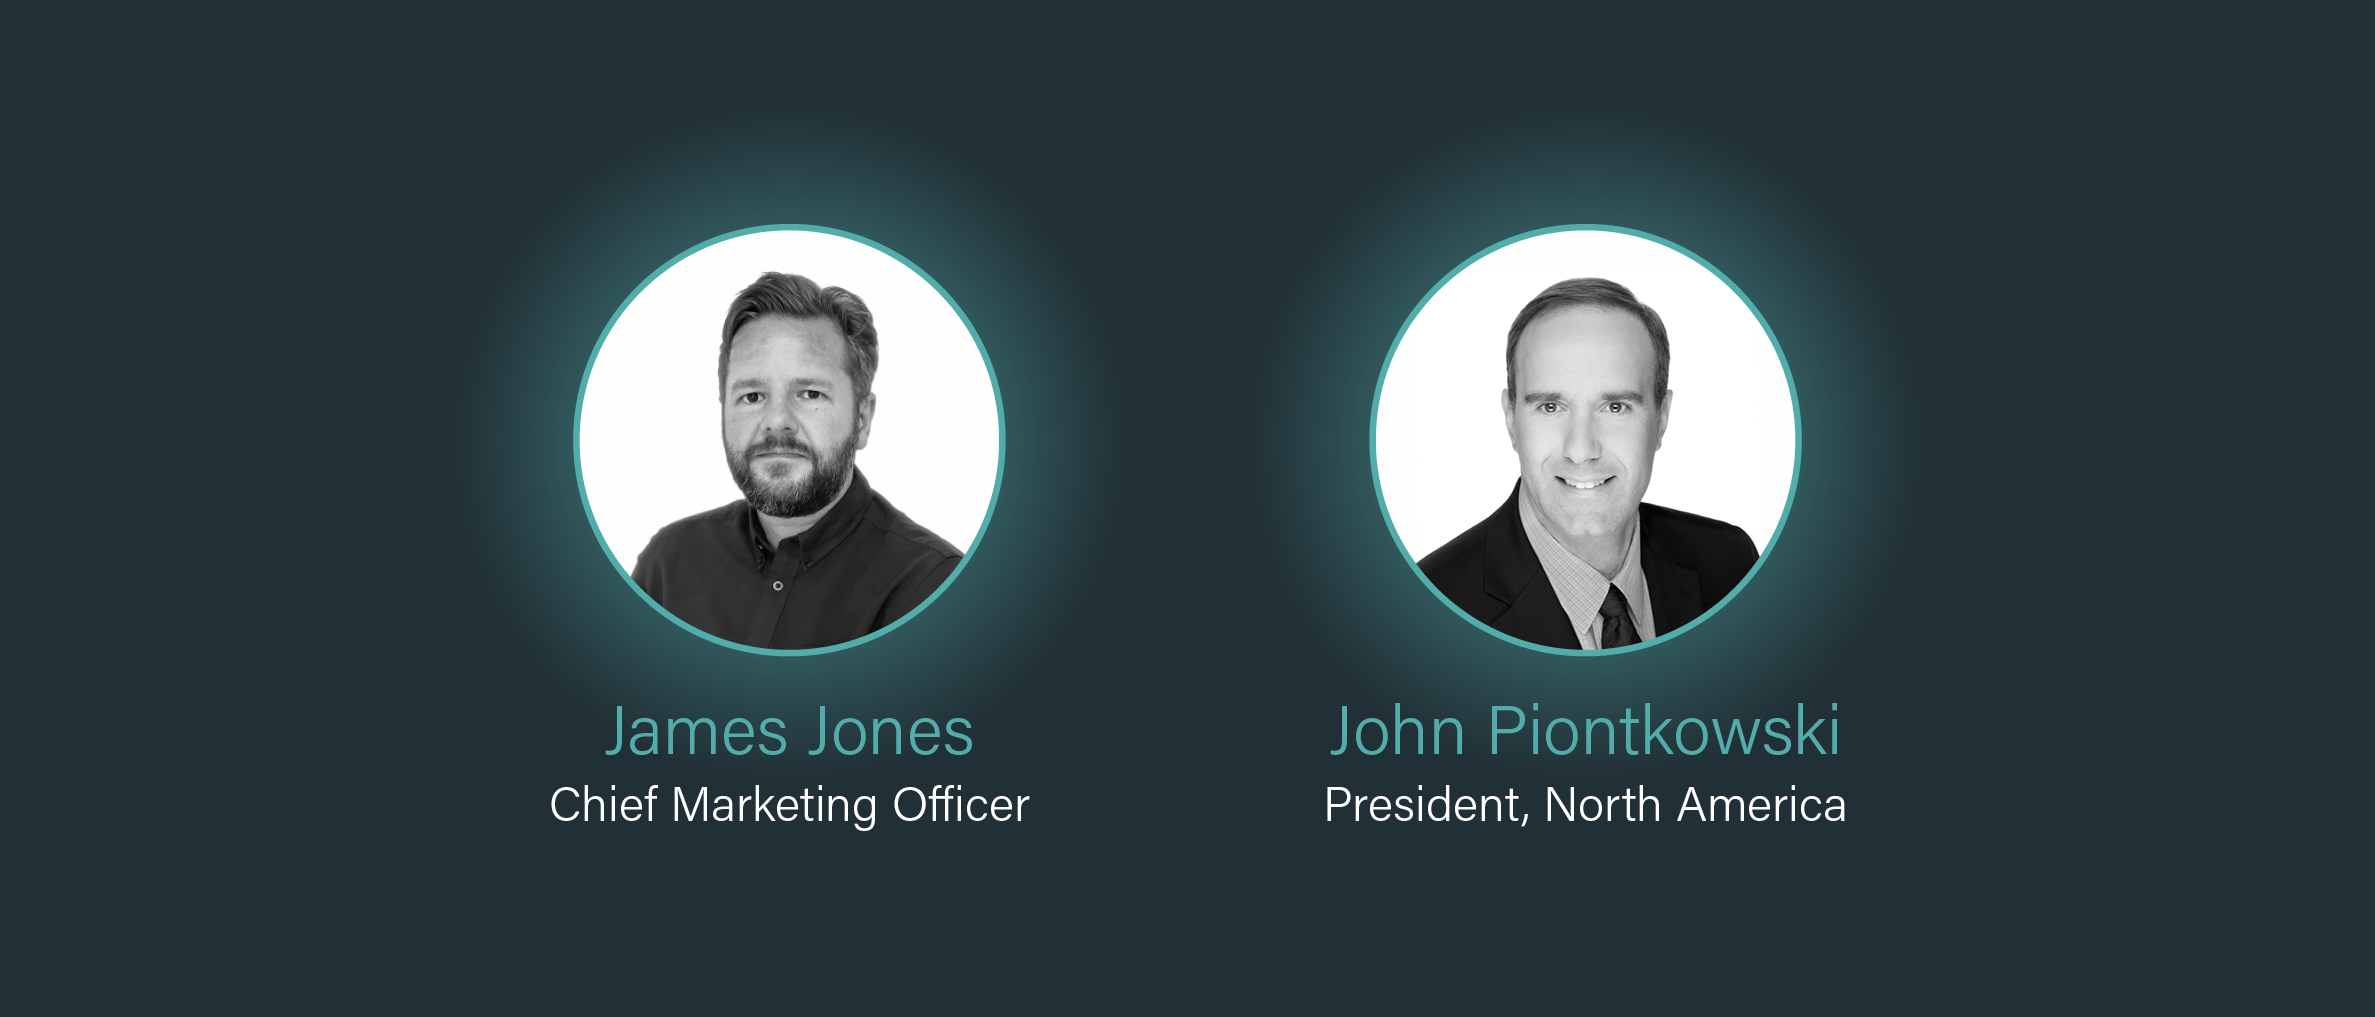 Captify Appoints James Jones to Chief Marketing Officer and John Piontkowski to President of North America  